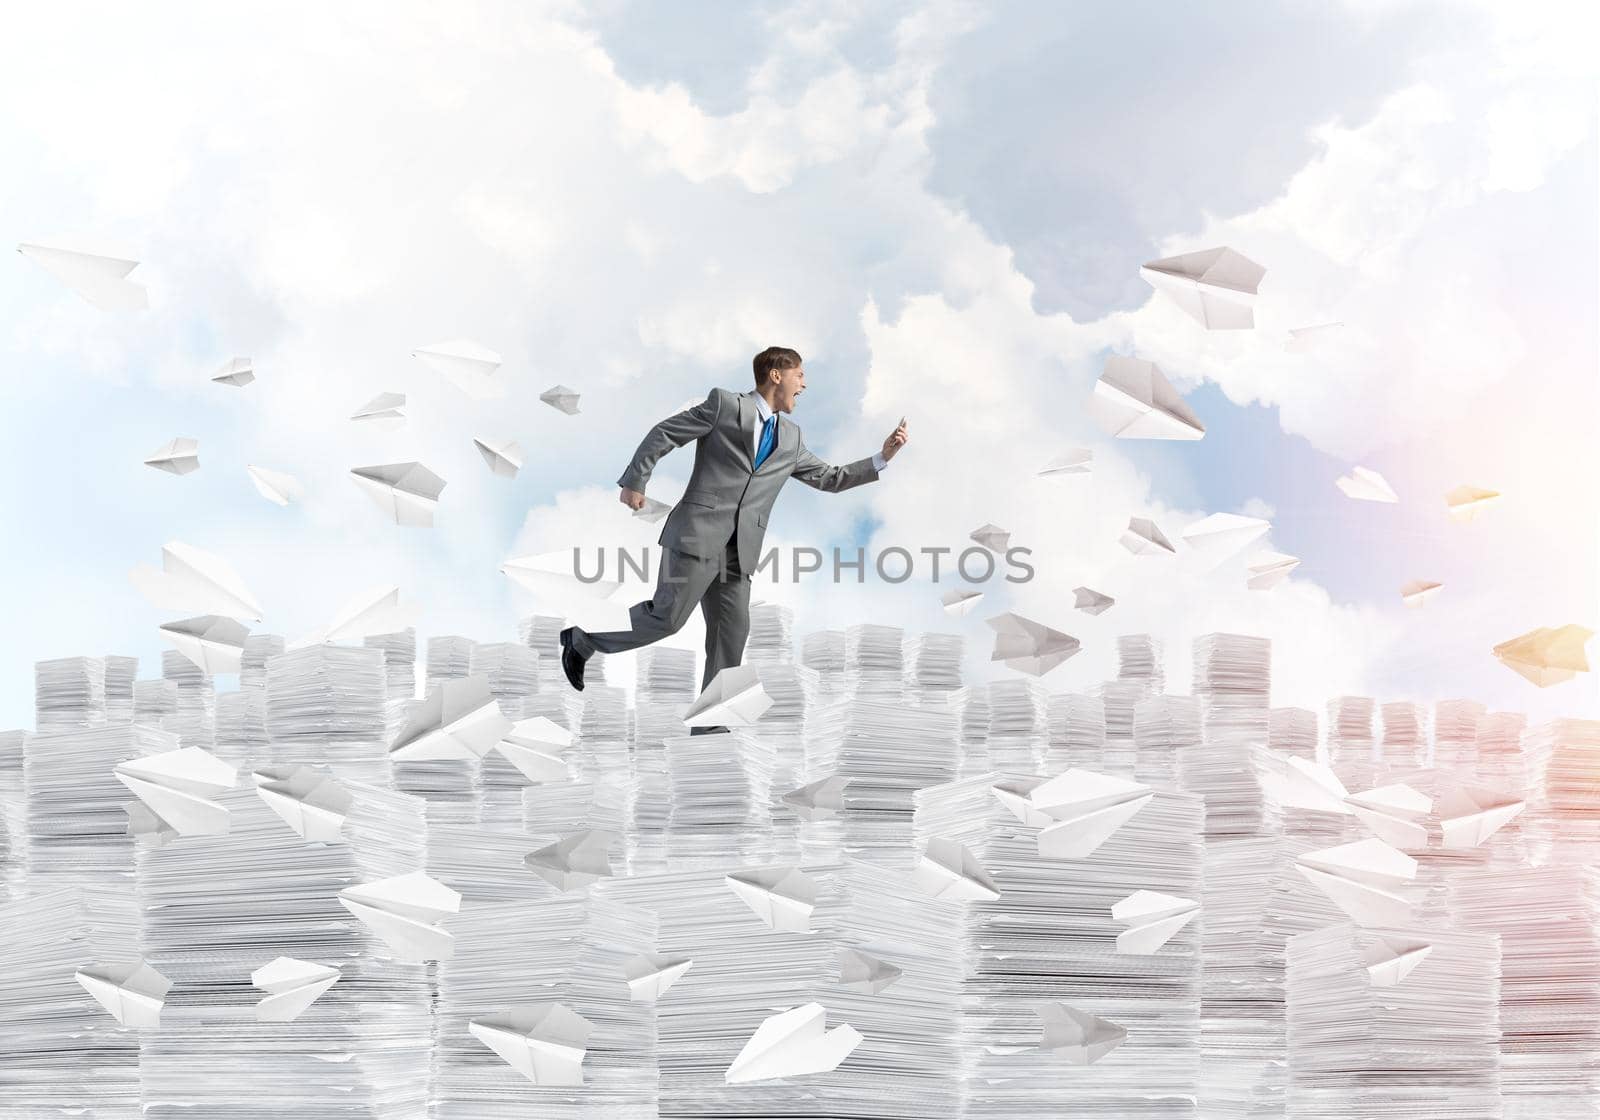 Businessman in black suit running with phone in hand among flying paper planes with cloudly skyscape on background. Mixed media.